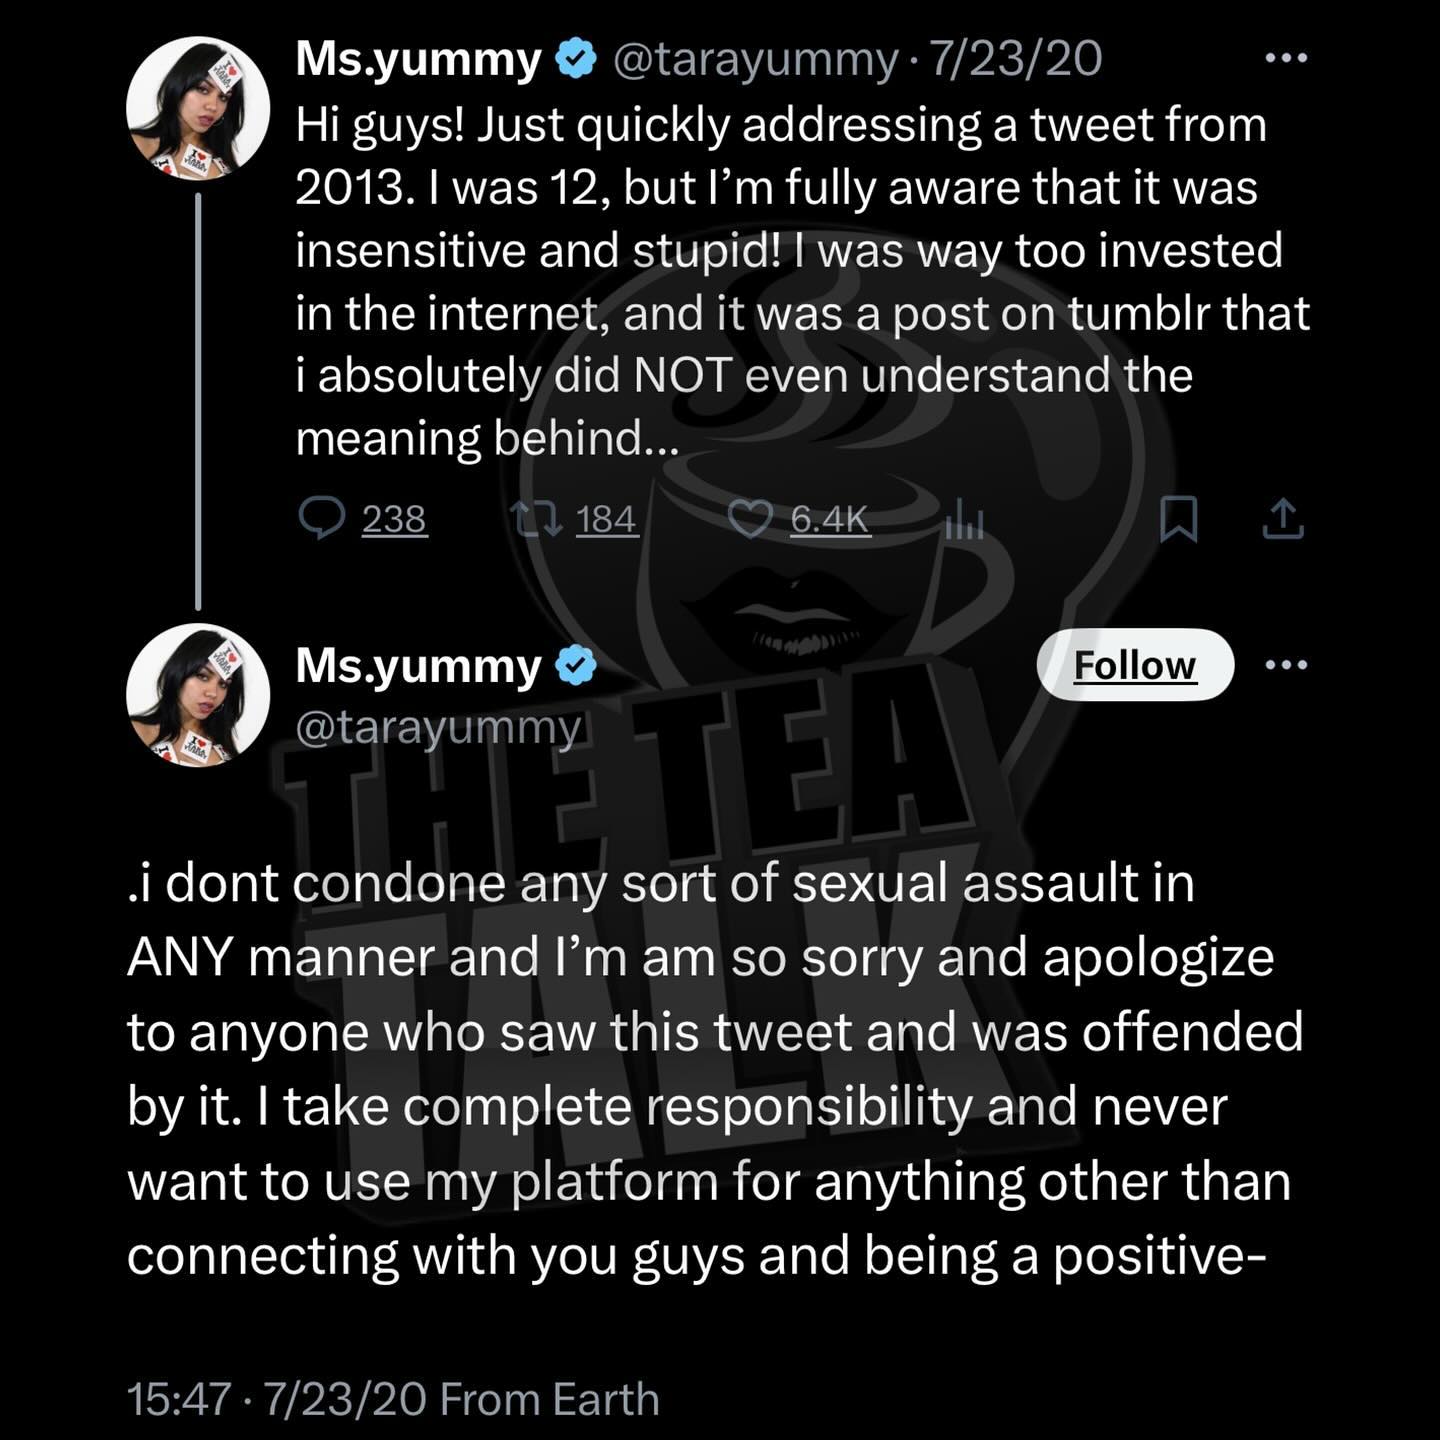 Tara Yummy's apology post that she made in July 2020